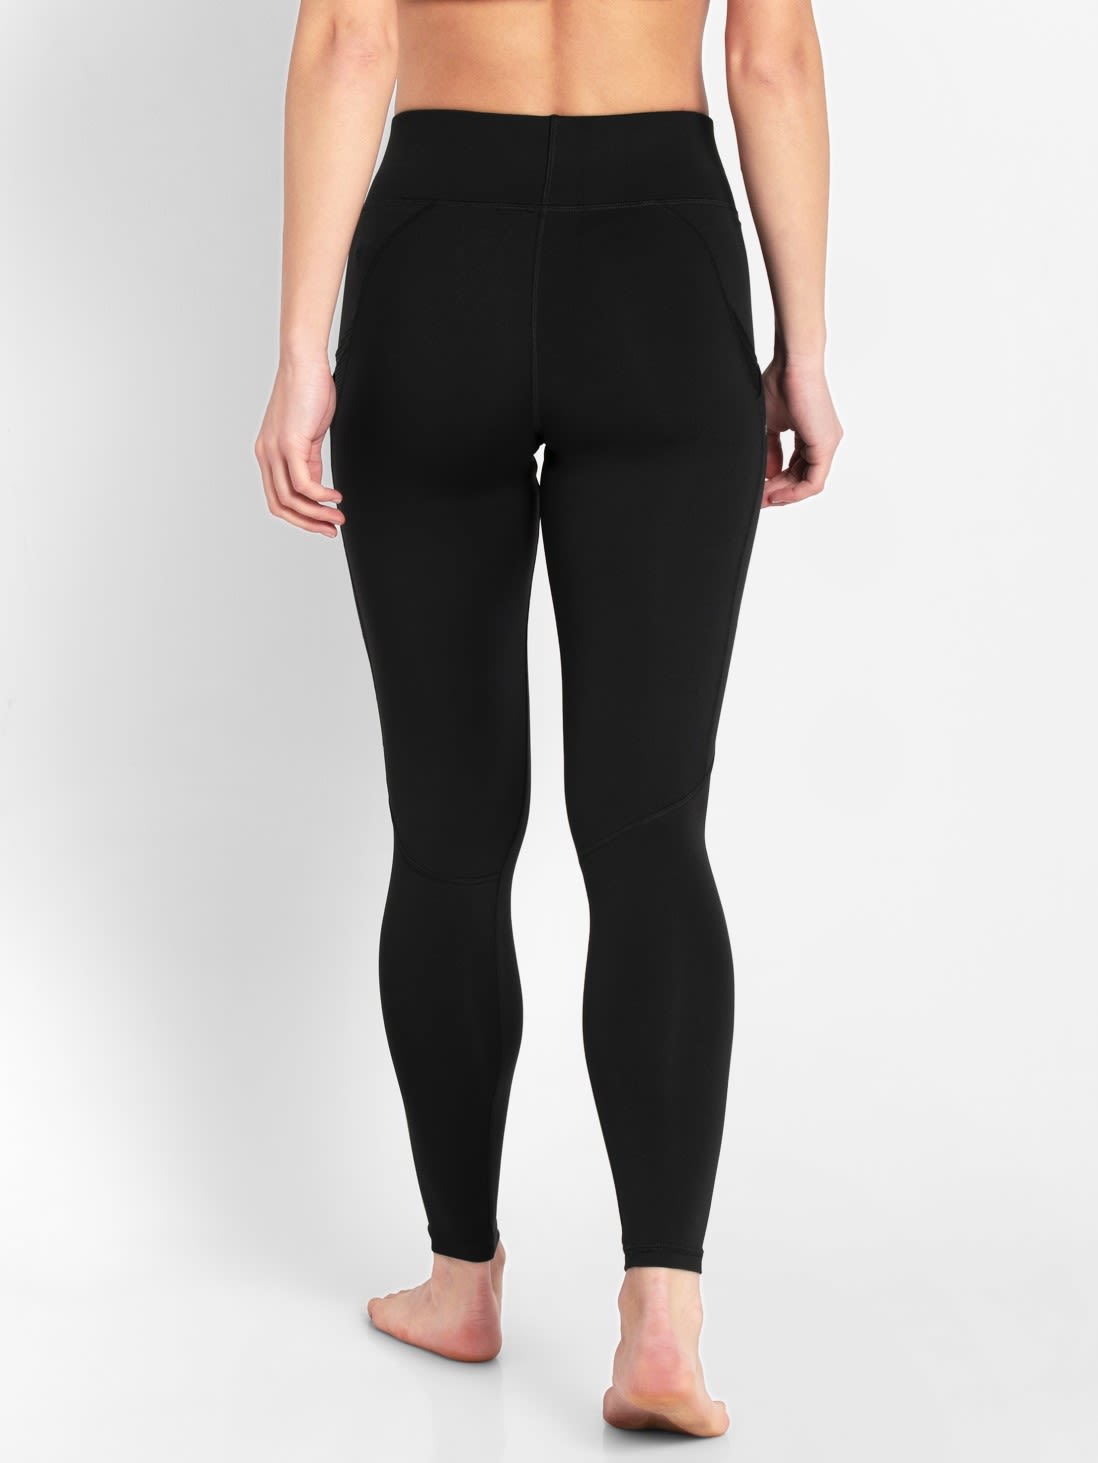 Buy Snug Fit High-Rise Active Tights in Black Online India, Best Prices,  COD - Clovia - AB0042B13